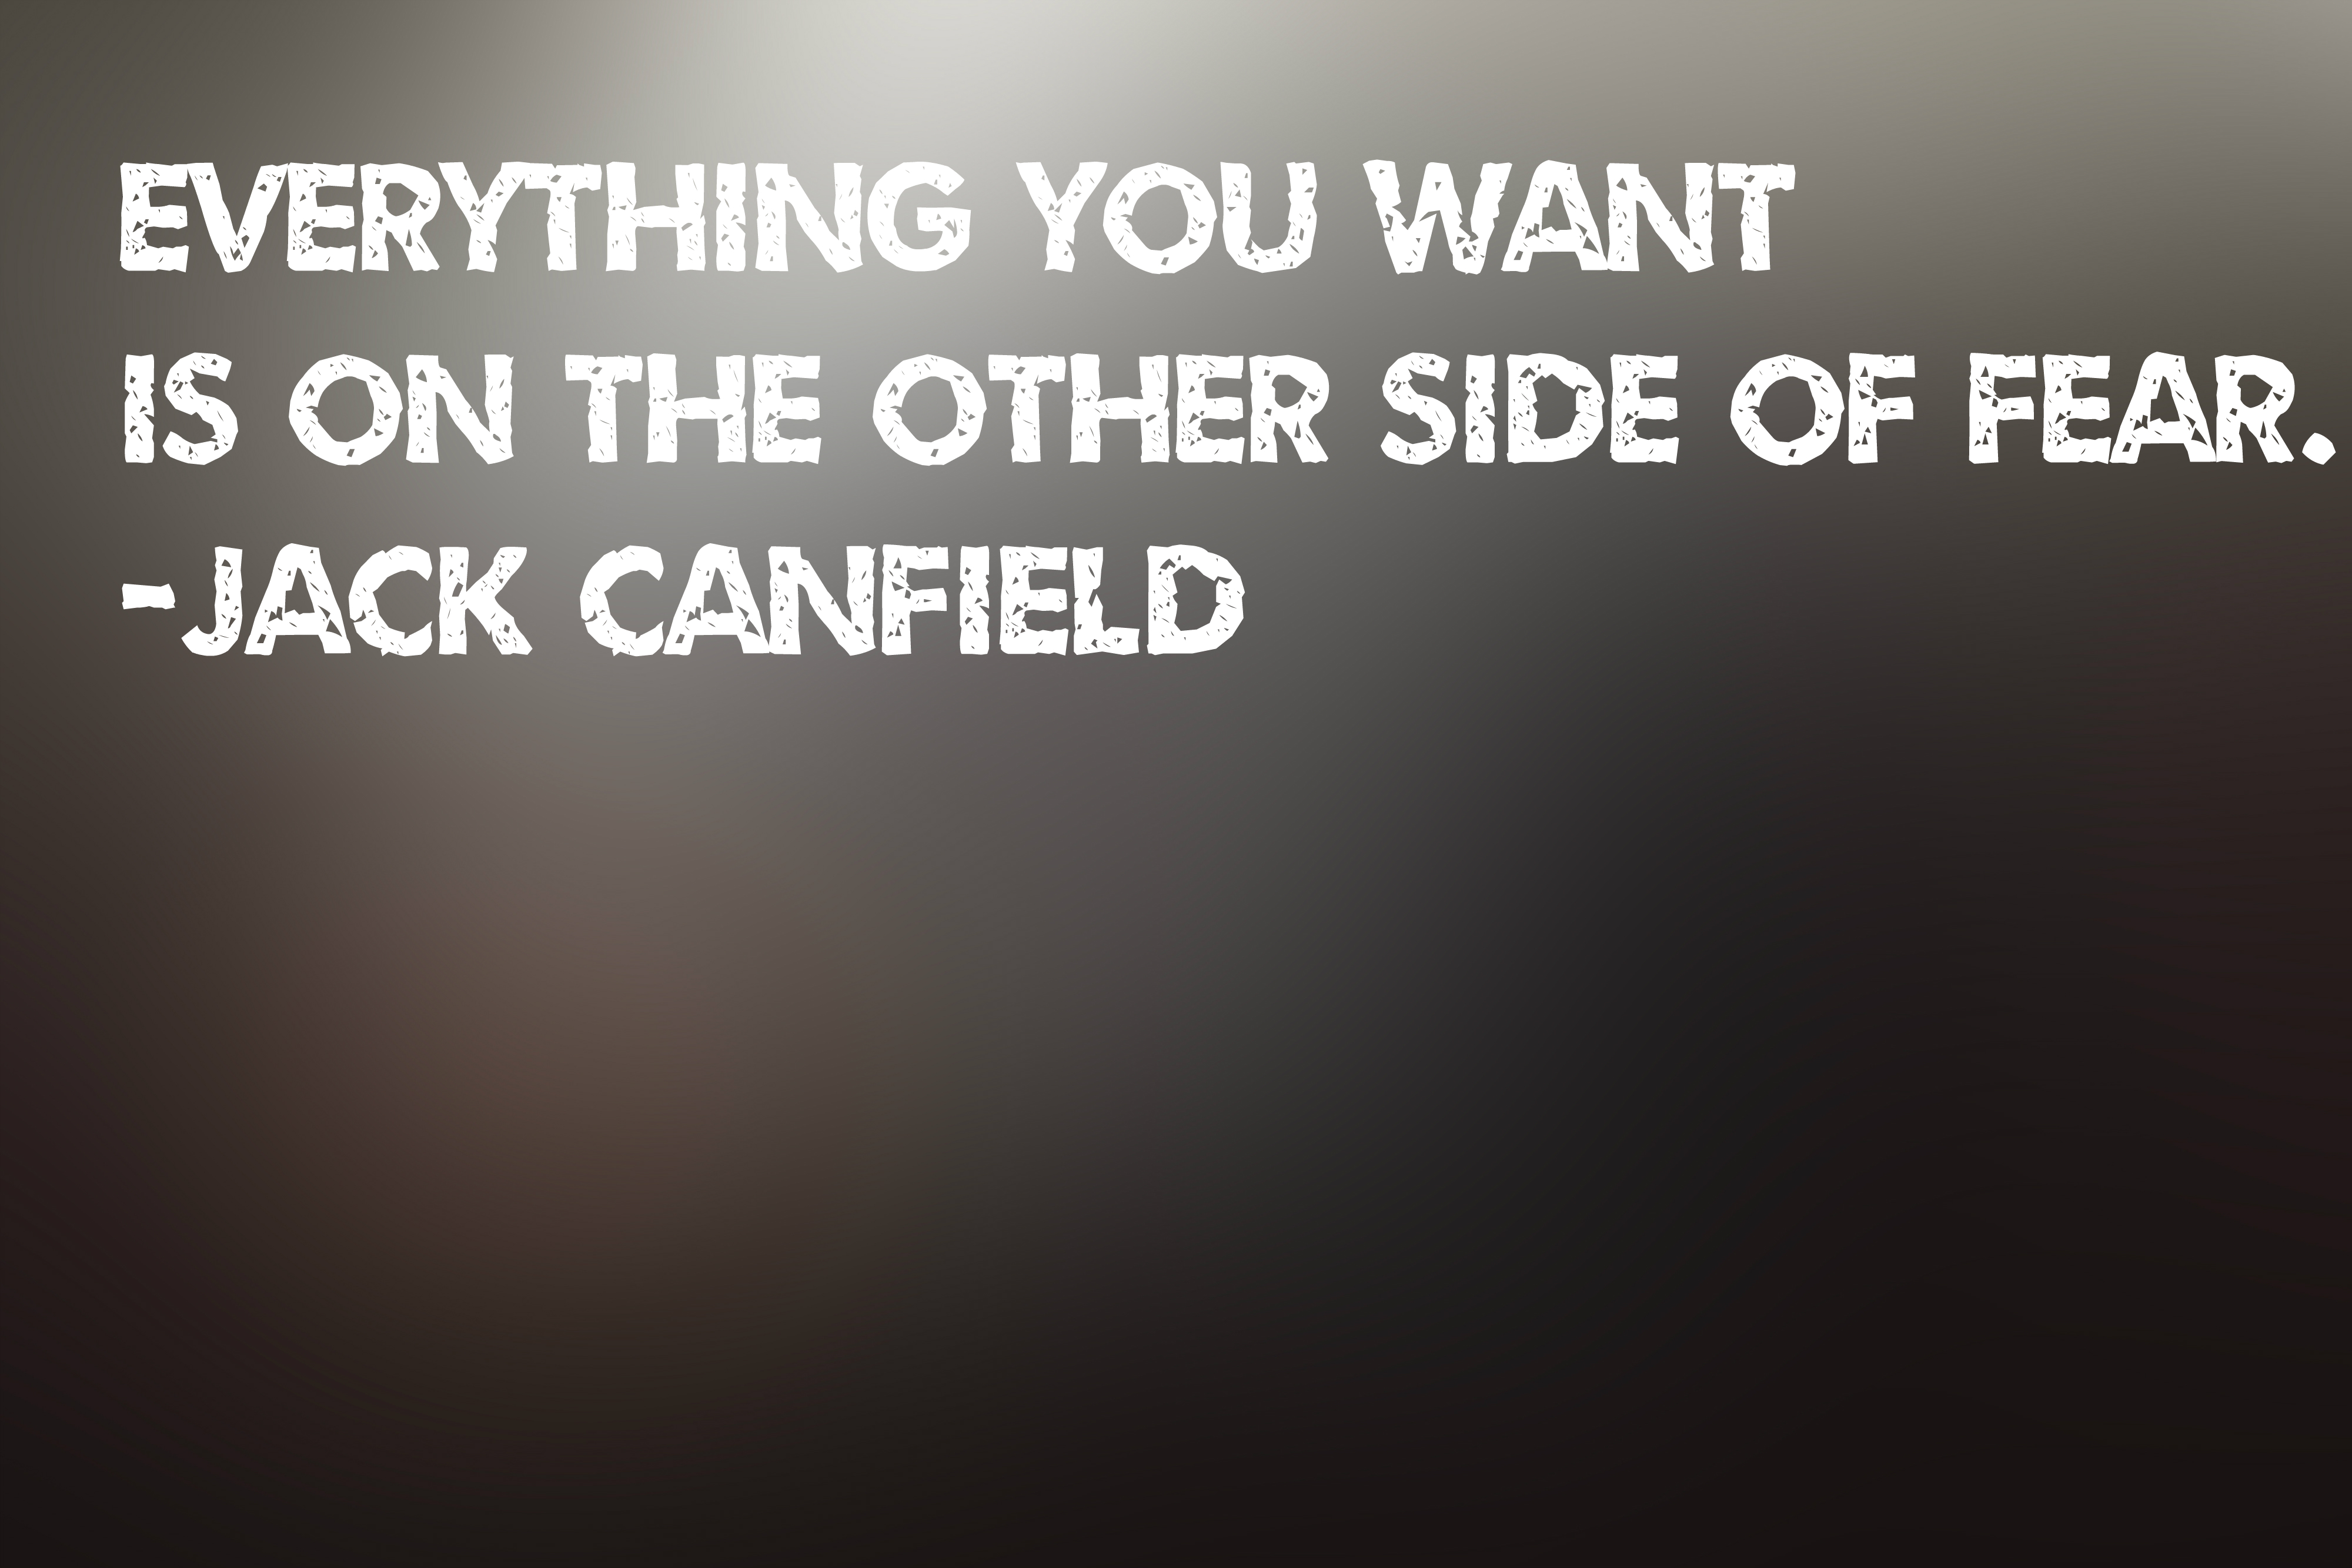 over the hump day inspiration Jack Canfield edition